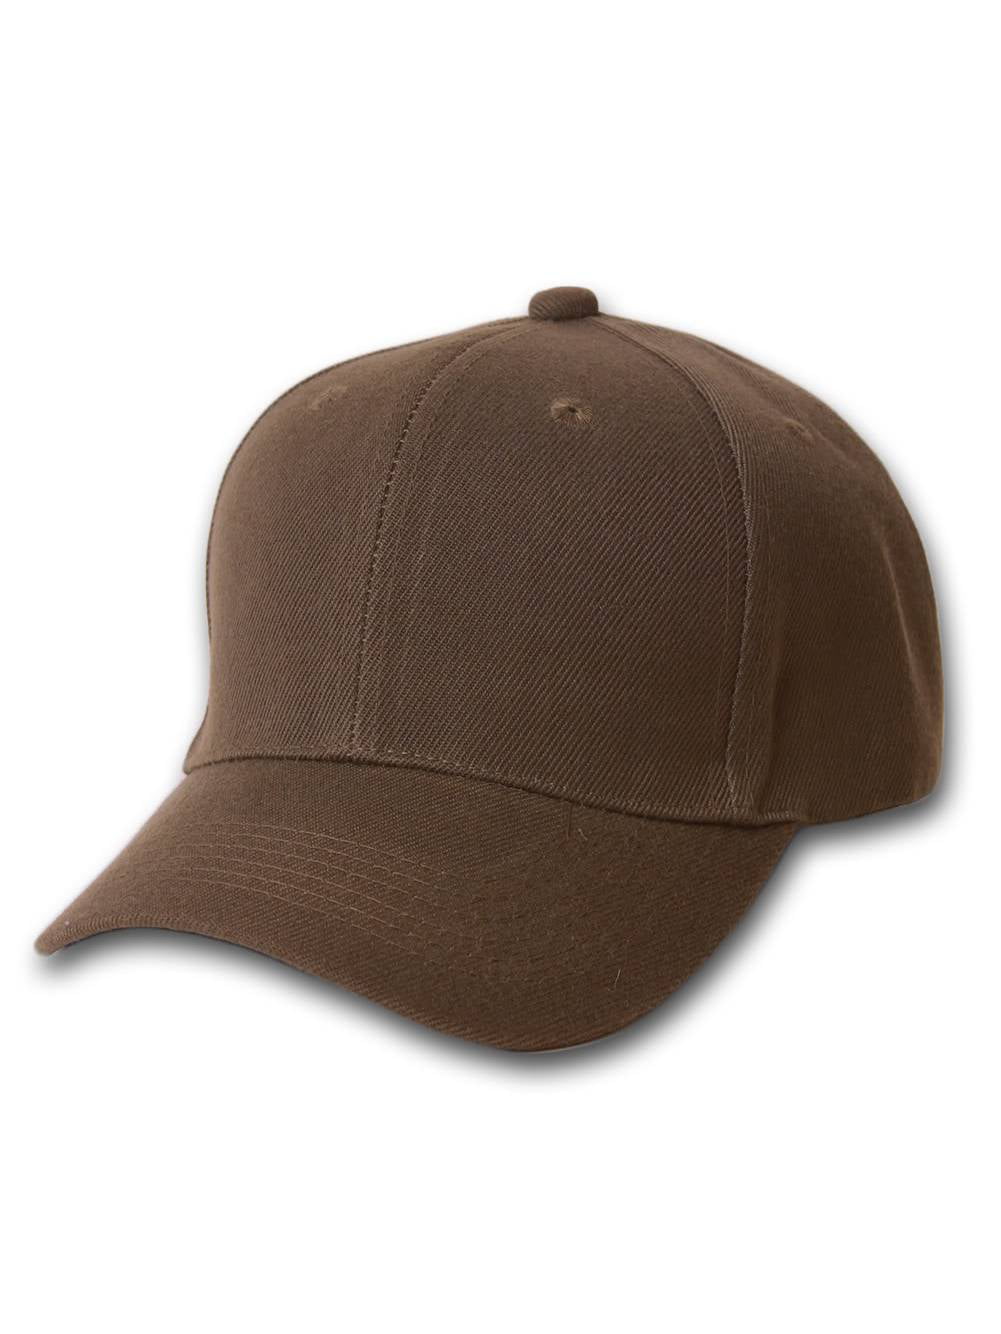 Fitted Hats - Plain Fitted Curve Bill Hat, Brown 7 1/8 - Walmart.com